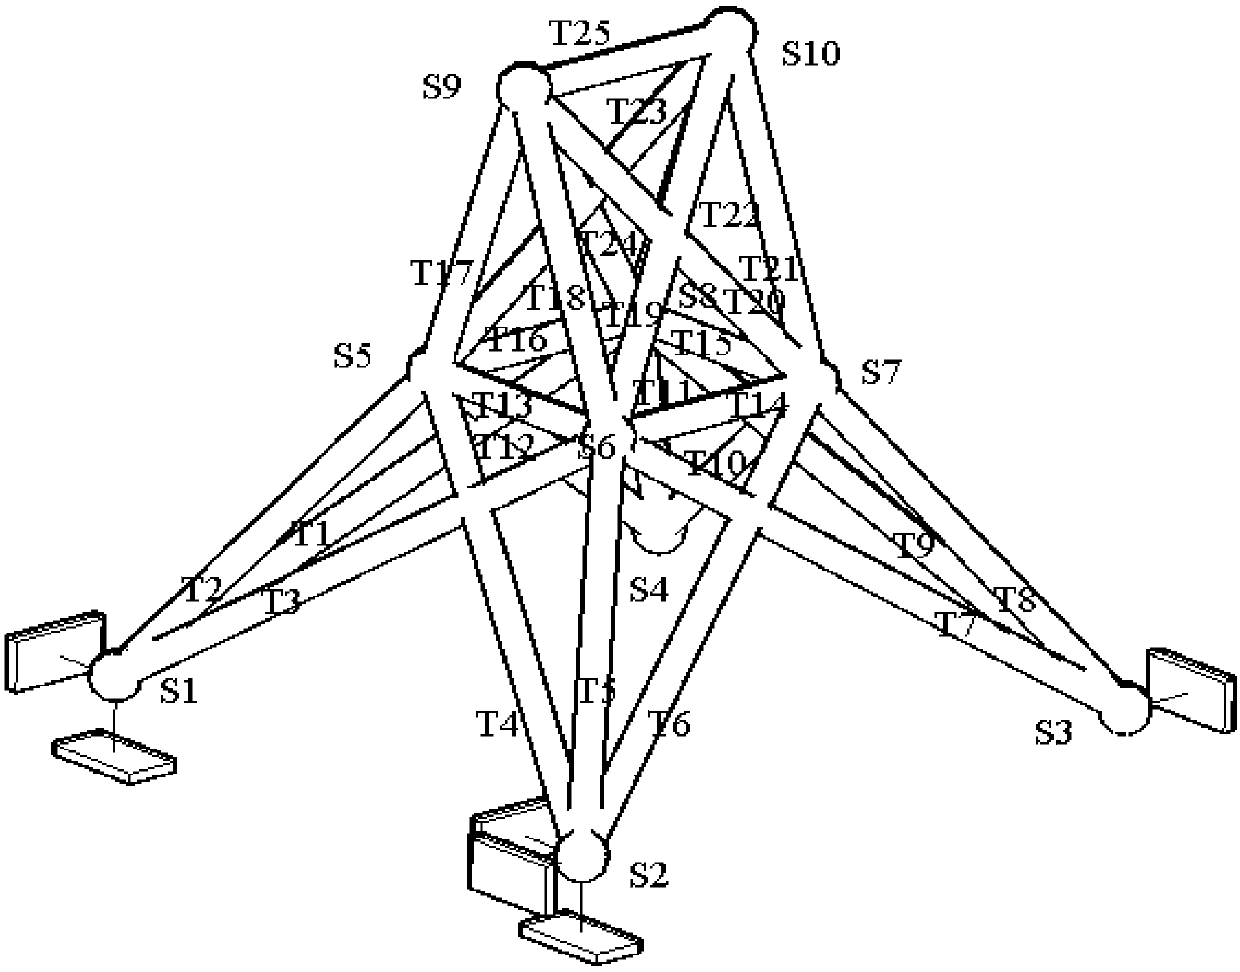 Method and system for space roof truss damage detection